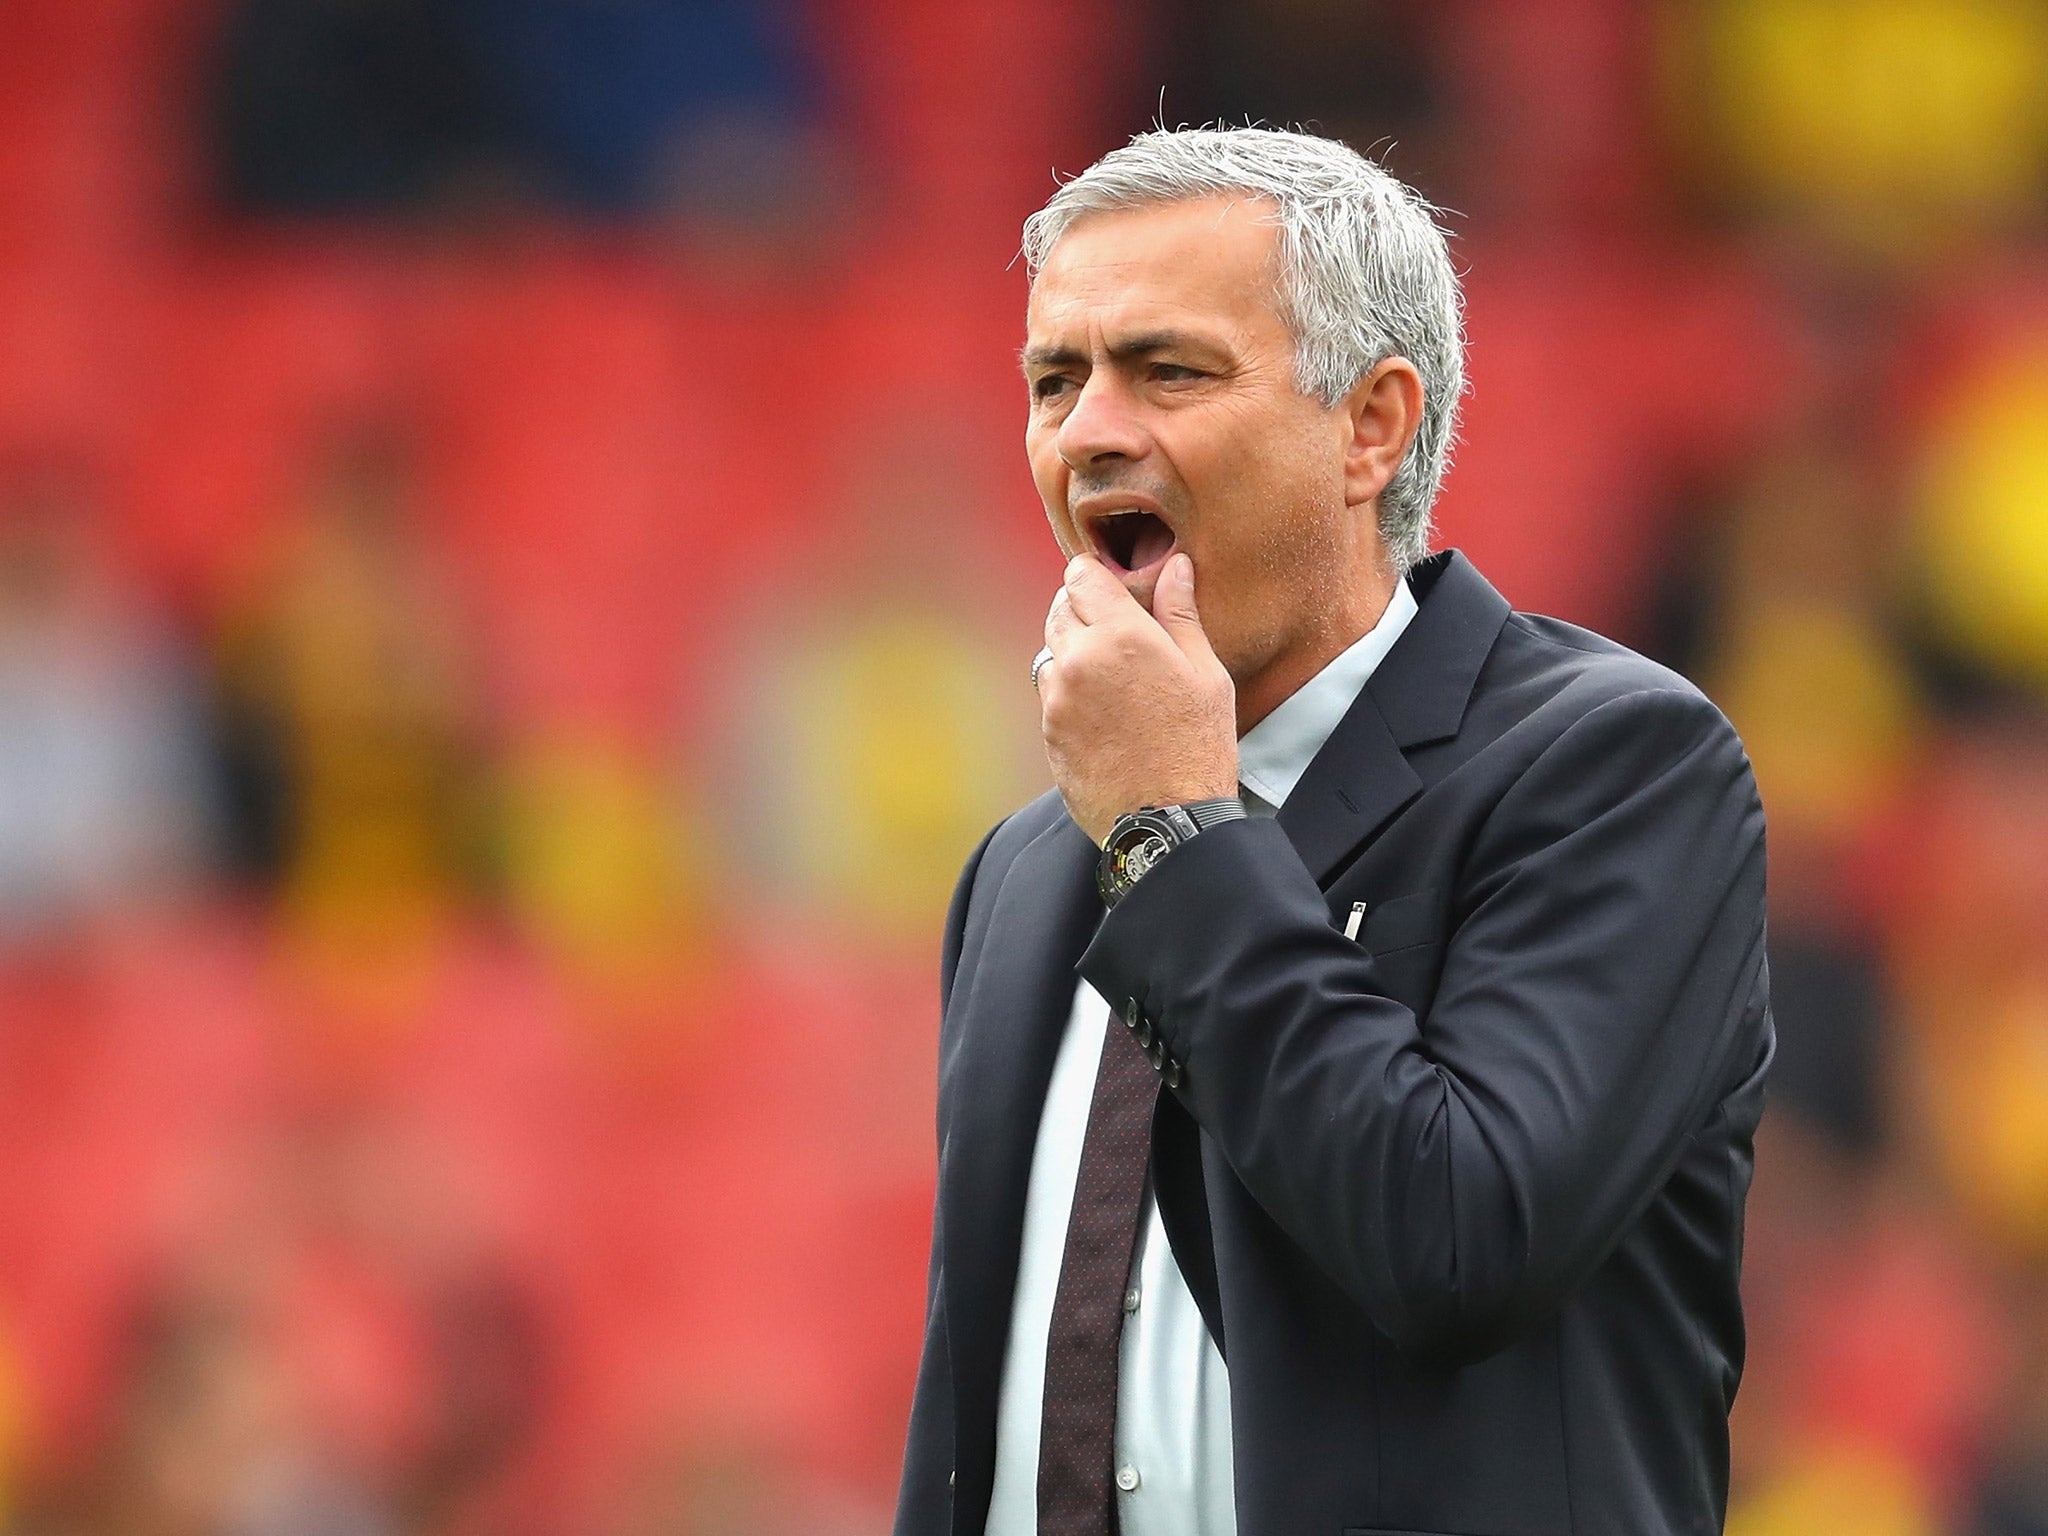 Jose Mourinho will not be panicking just yet despite three straight defeats with Manchester United